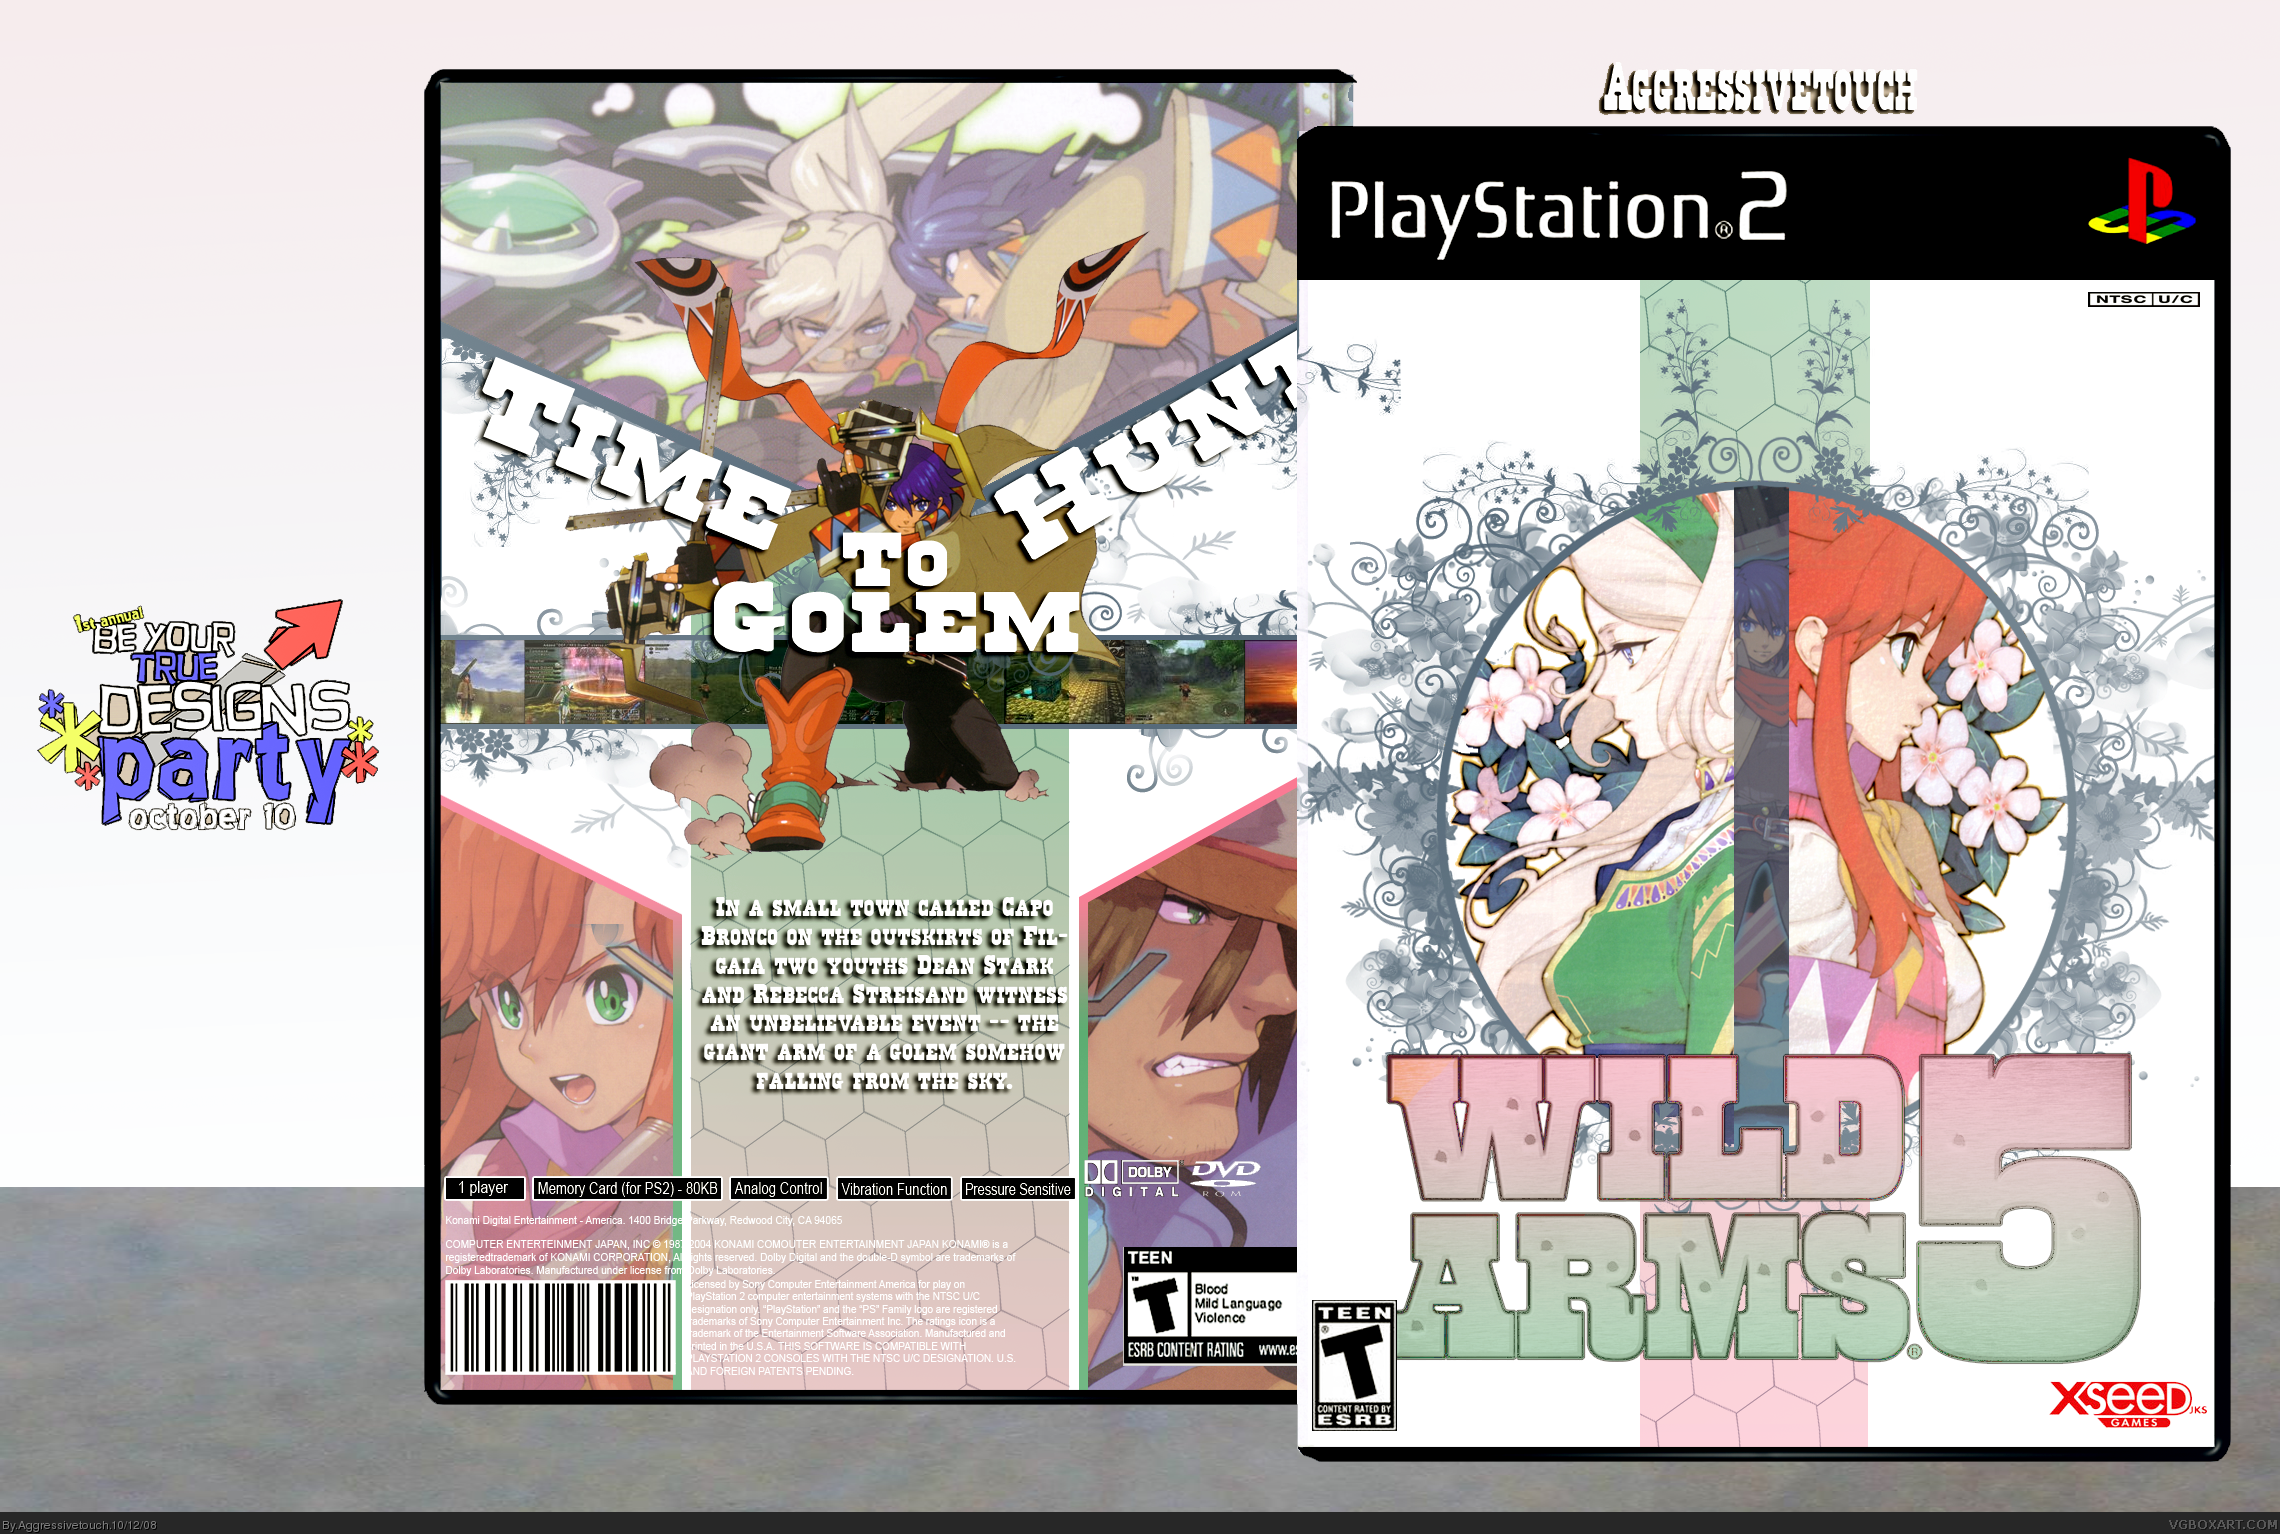 Wild Arms 5 box cover